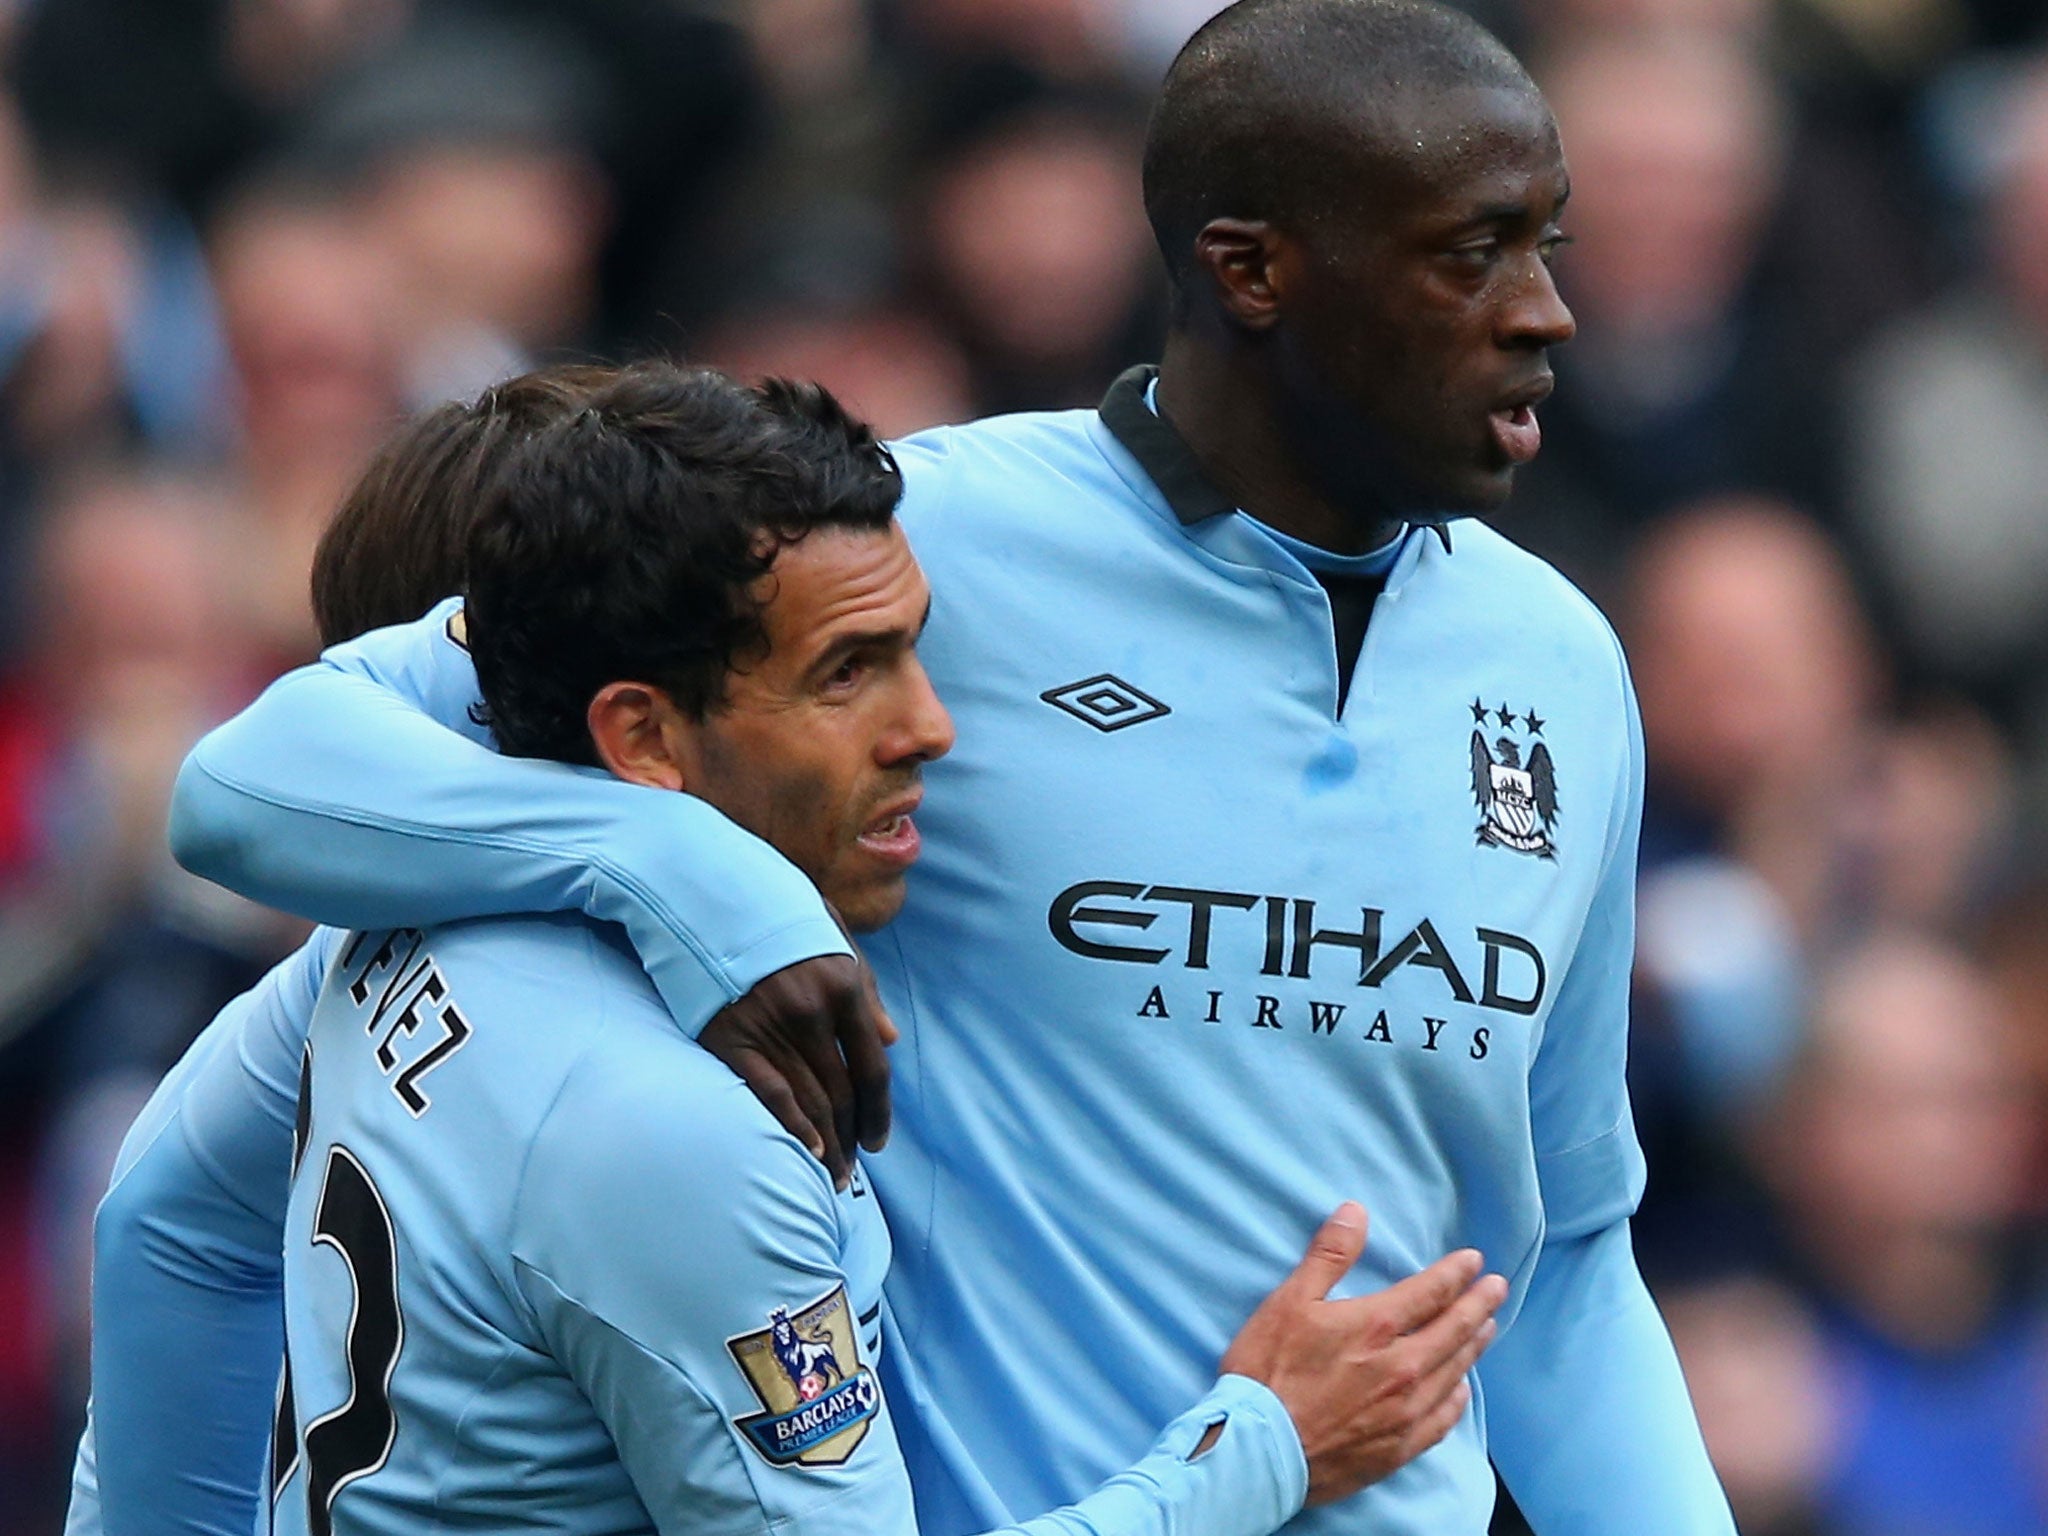 The recent news that Yaya Toure has extended his Manchester City contract to 2017 might provided the club a morale boost